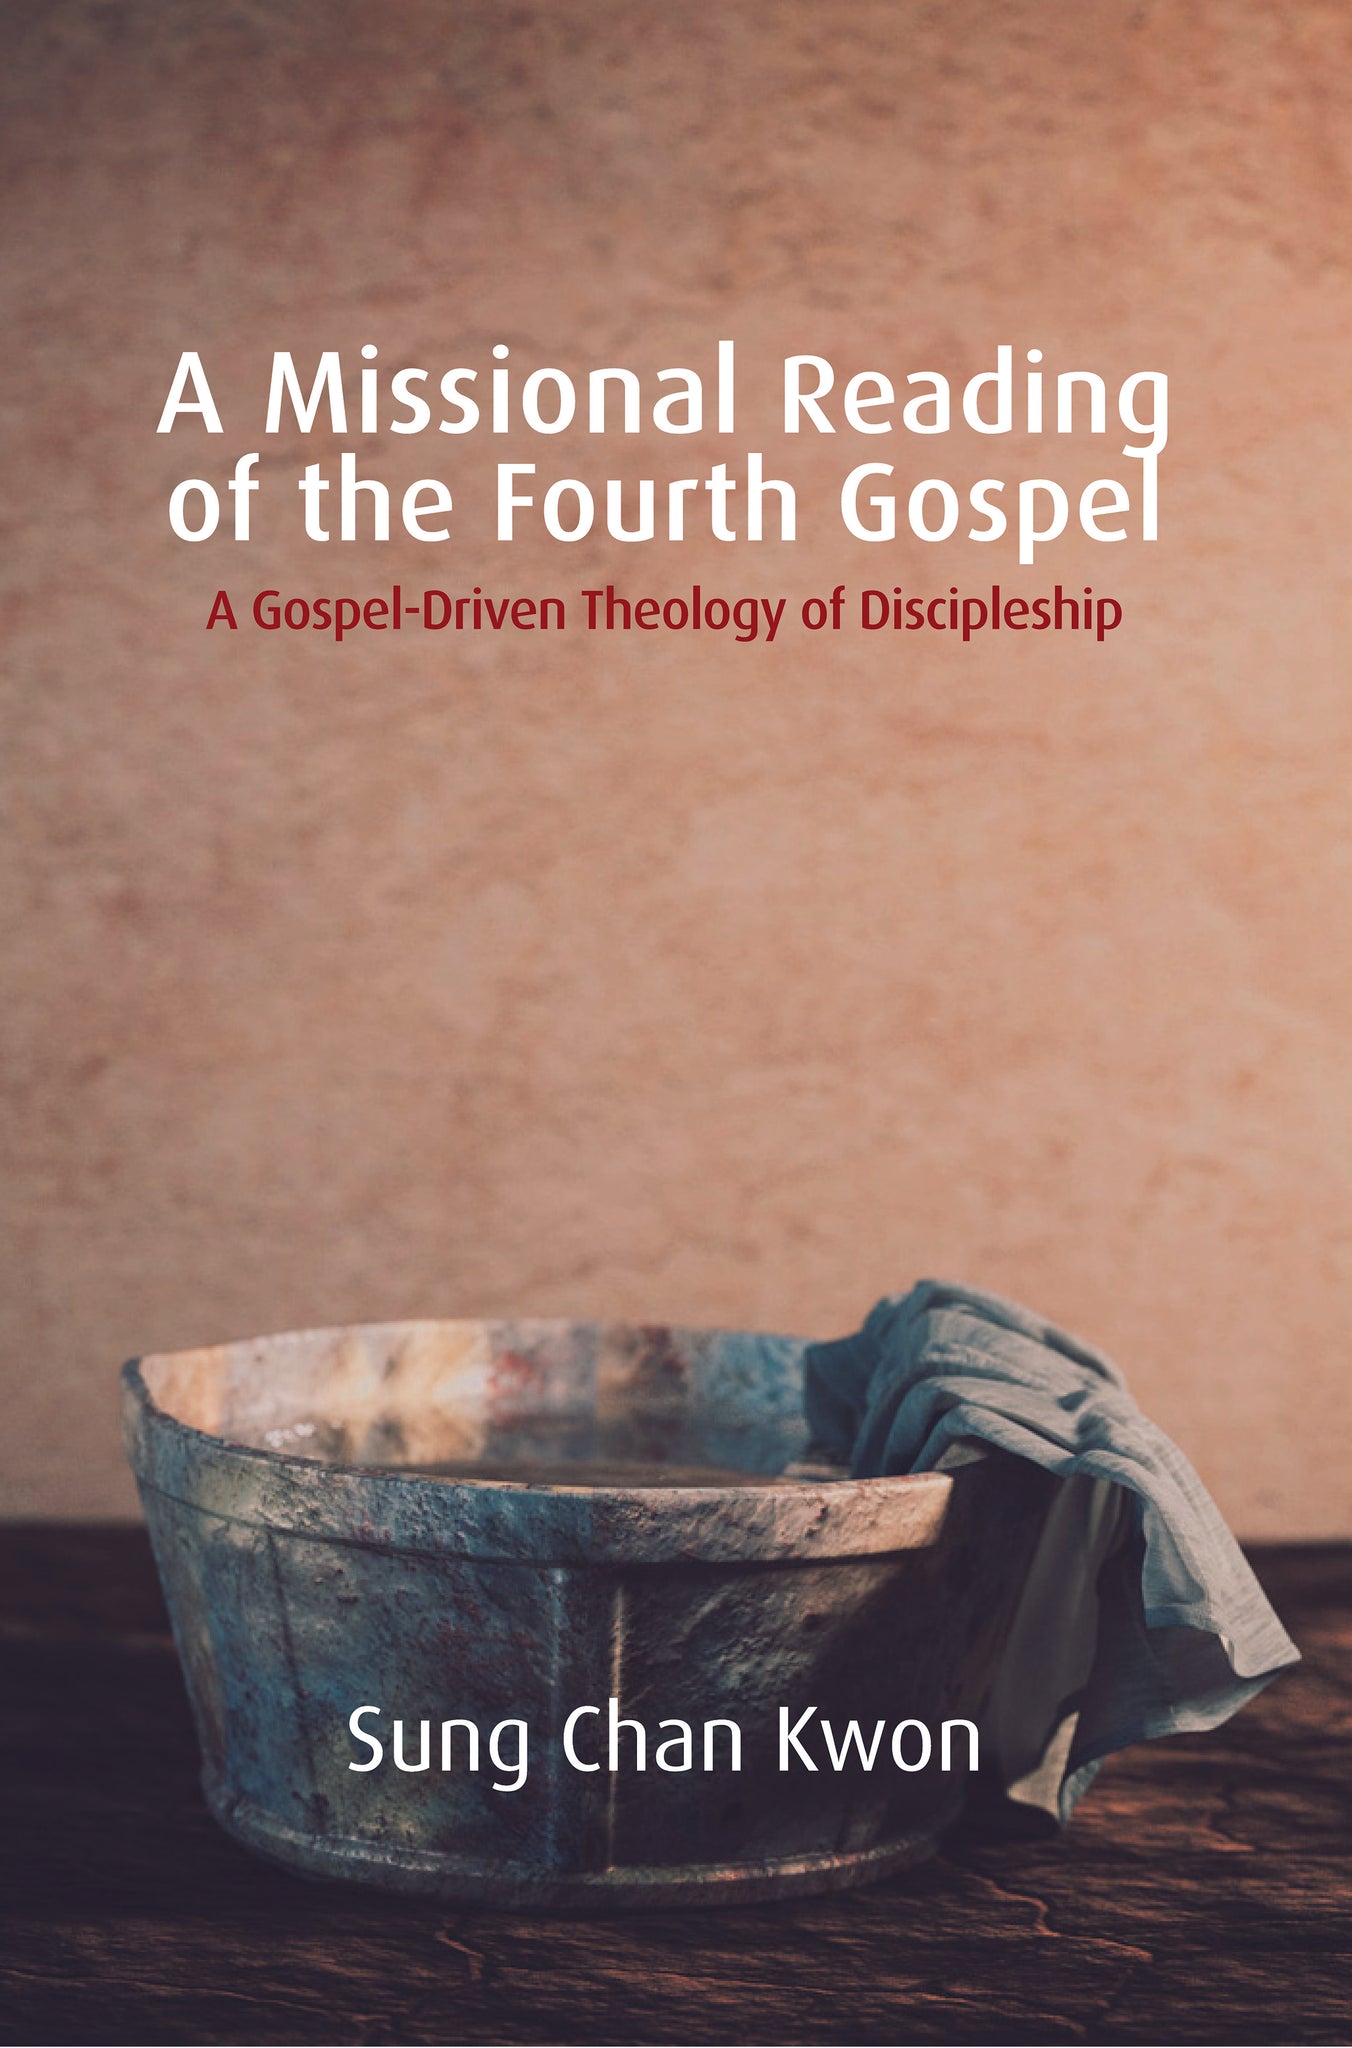 A Missional Reading of the Fourth Gospel